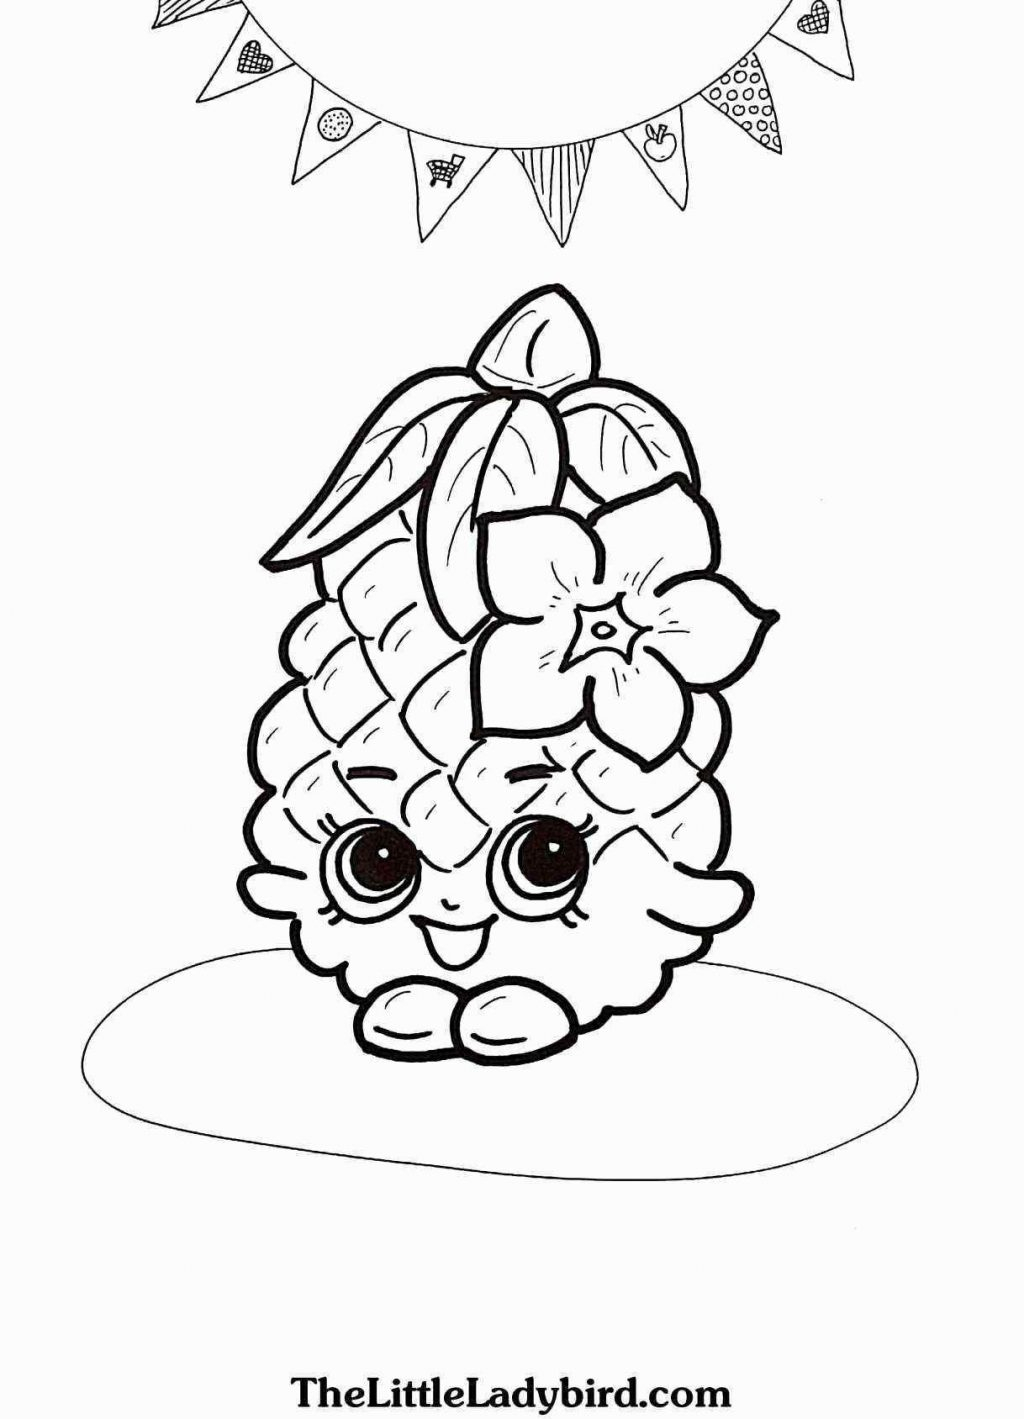 Little Boy Coloring Pages Printable Coloring Pages Cupcake Coloring Pages Einfache Malvorlagen Easy